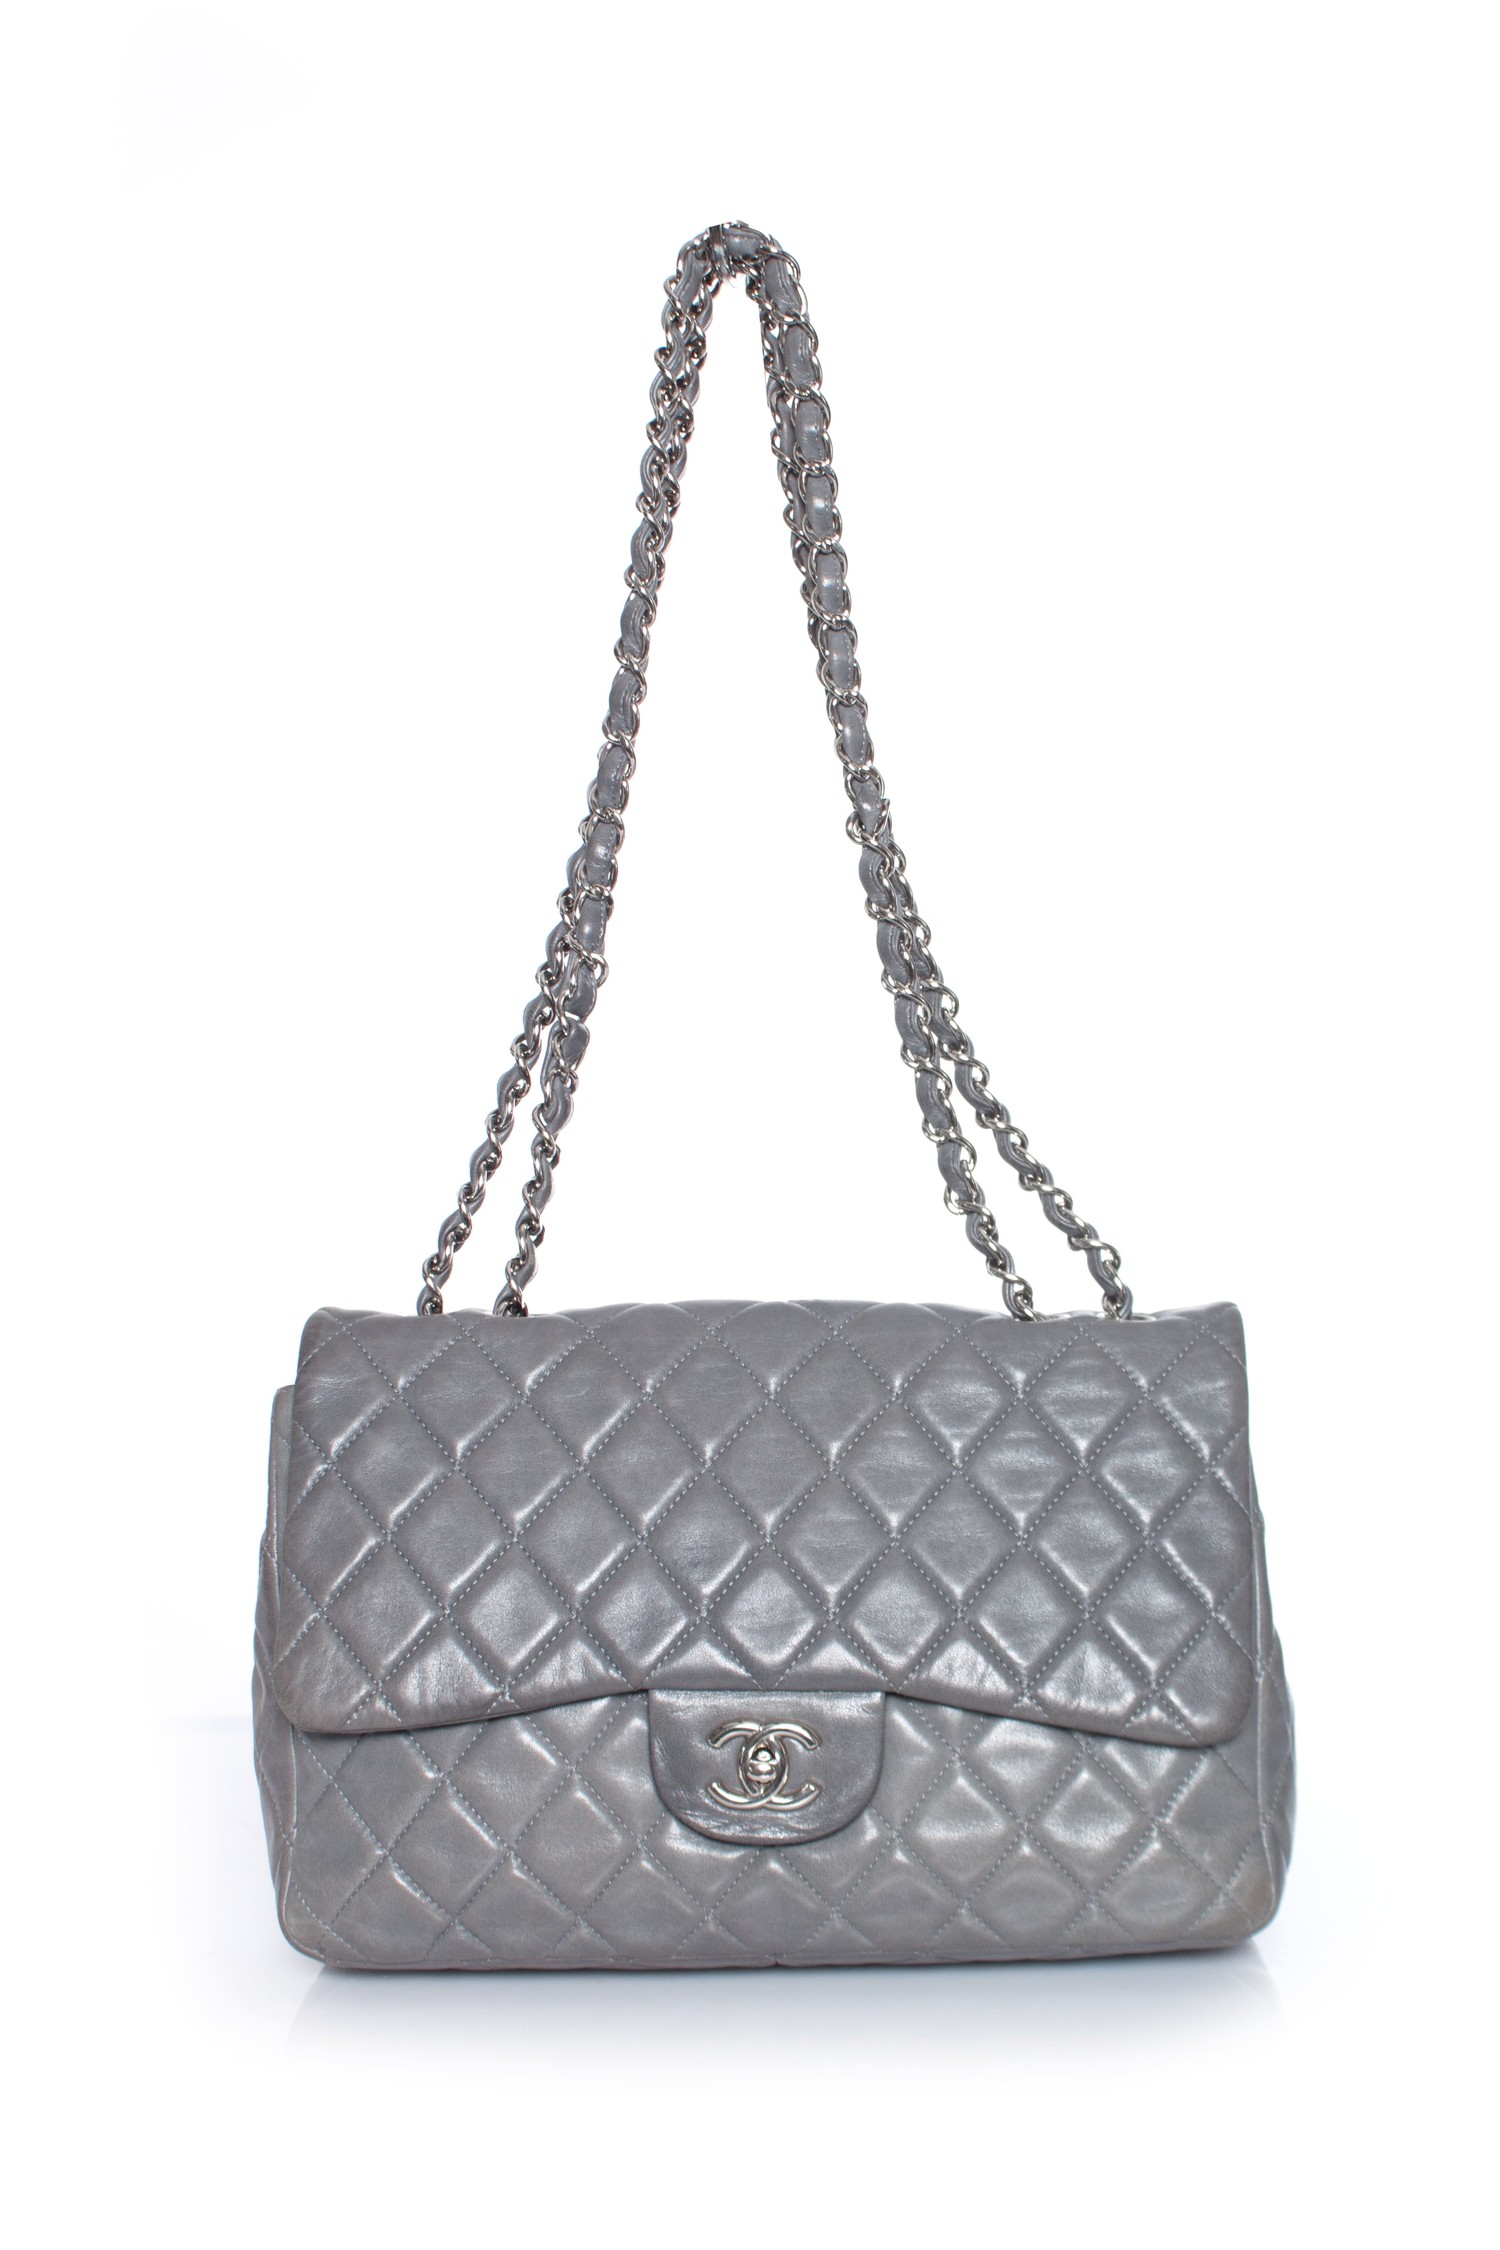 Chanel Classic 255 Medium Flap in Grey Sparkle Fabric with Silver Hardware   SOLD